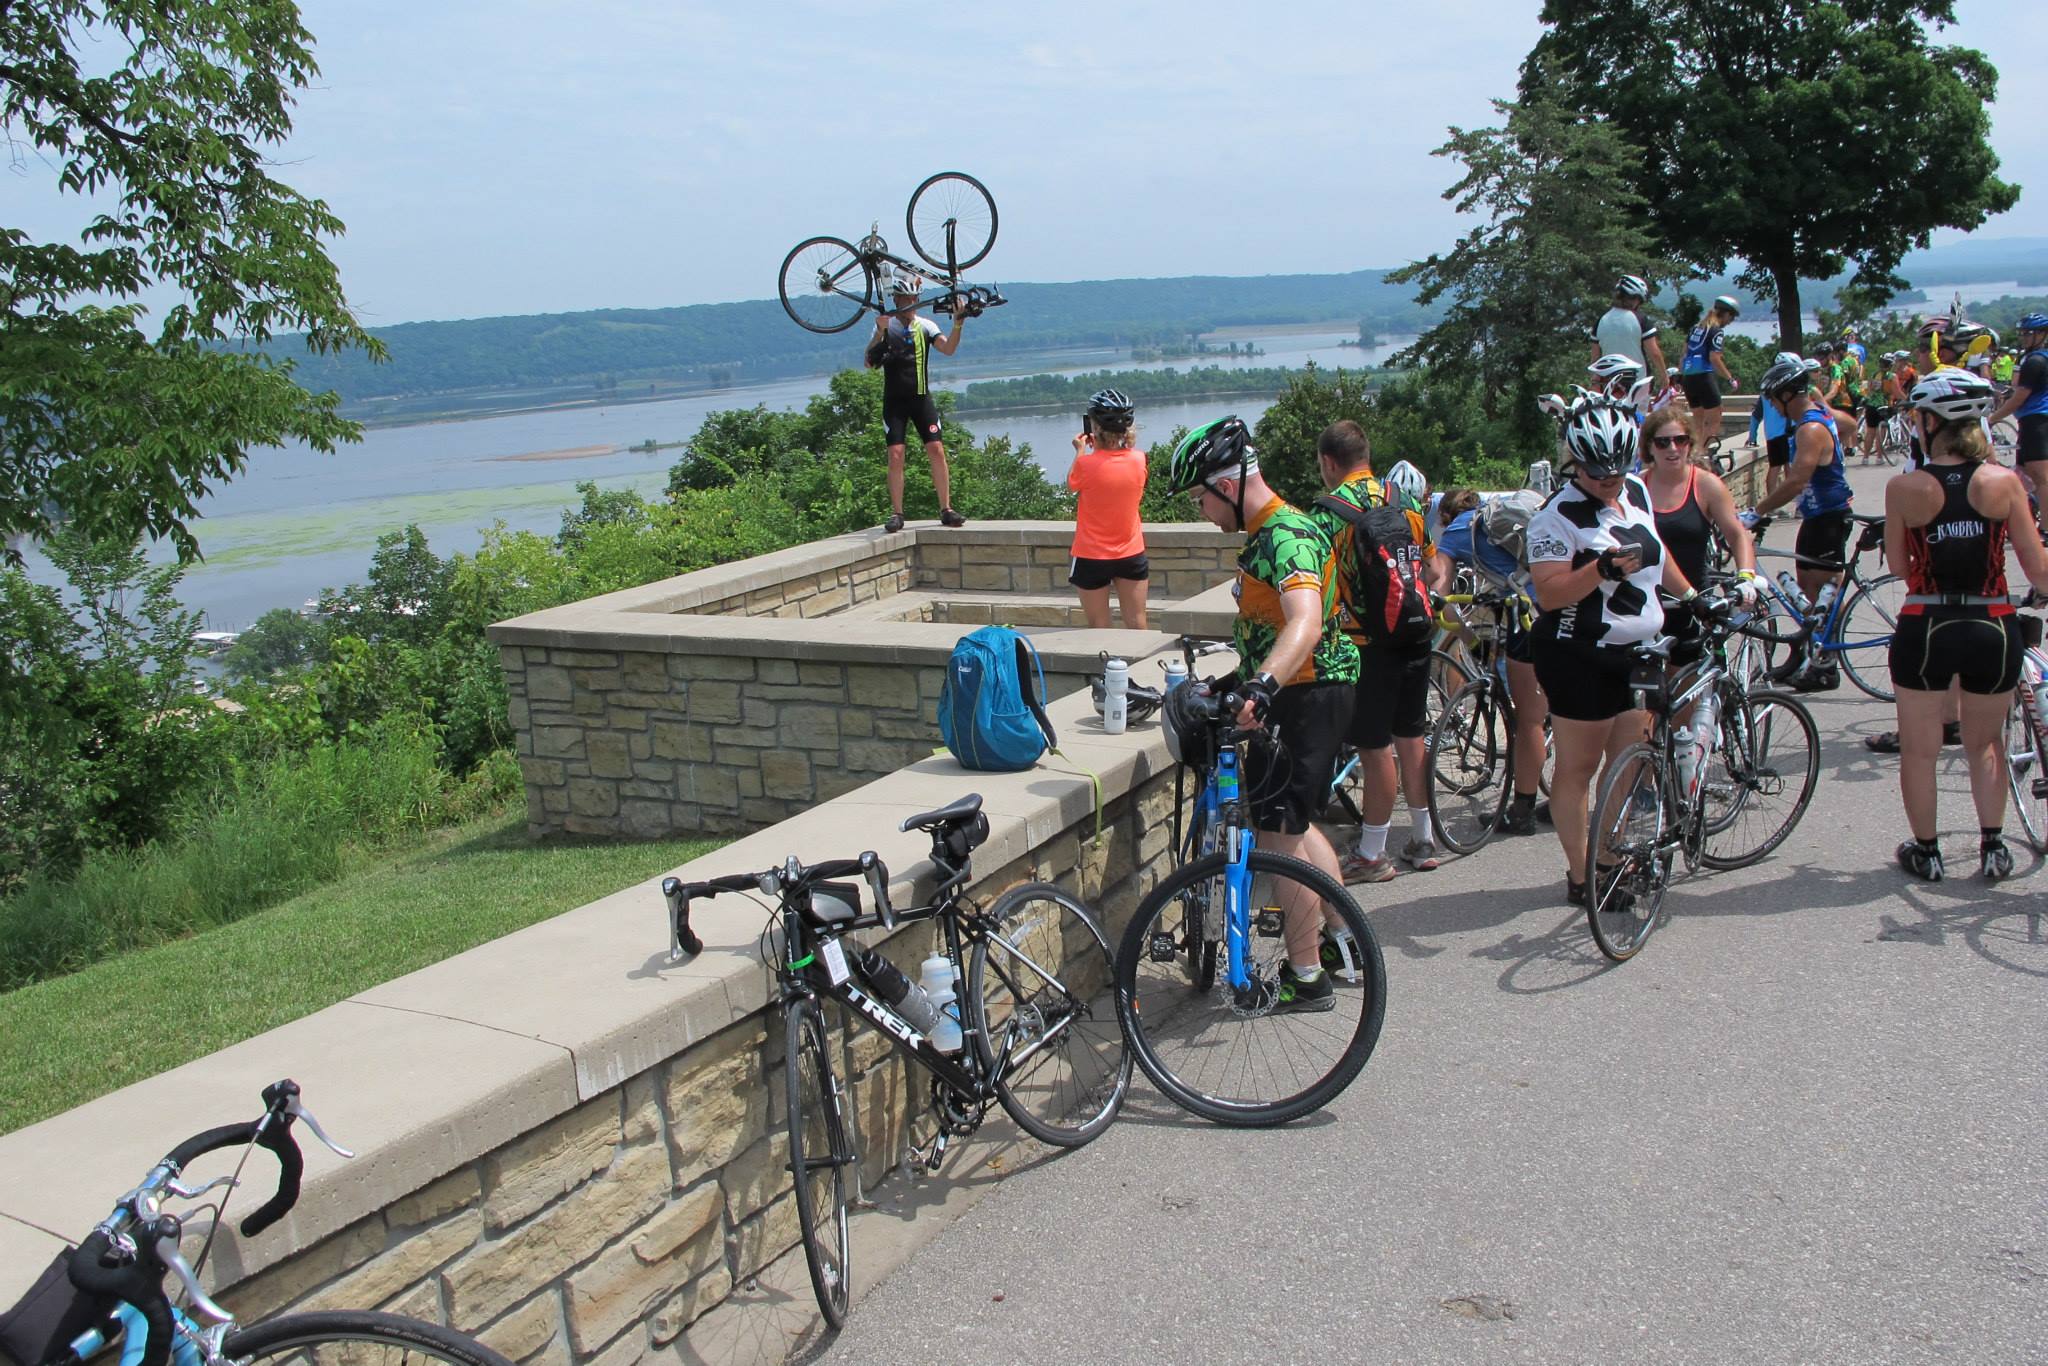 Overlook above the Mississippi. One mile to go and the celebrations have begun.